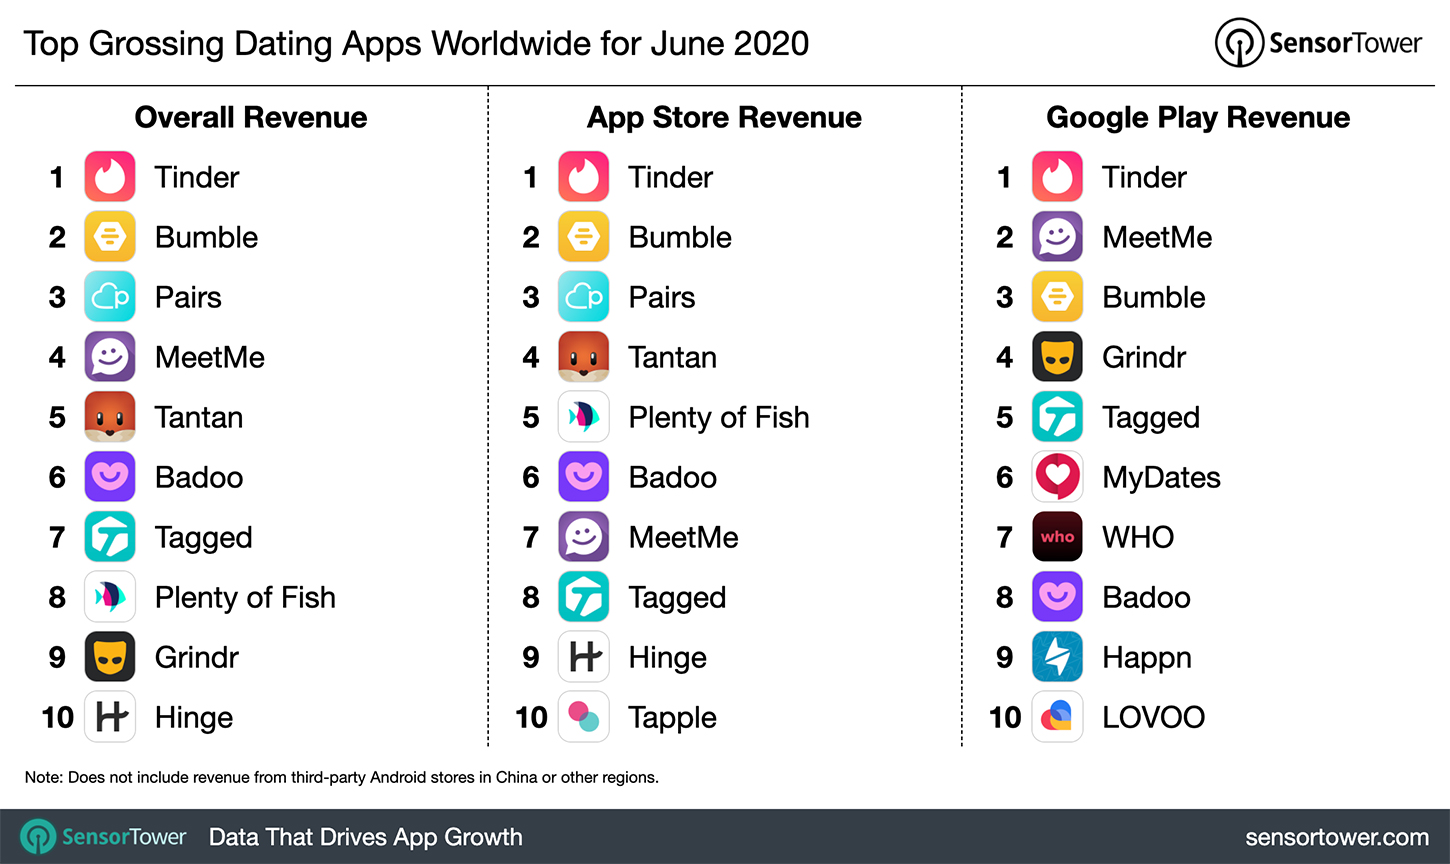 “Top Grossing Dating Apps Worldwide for June 2020